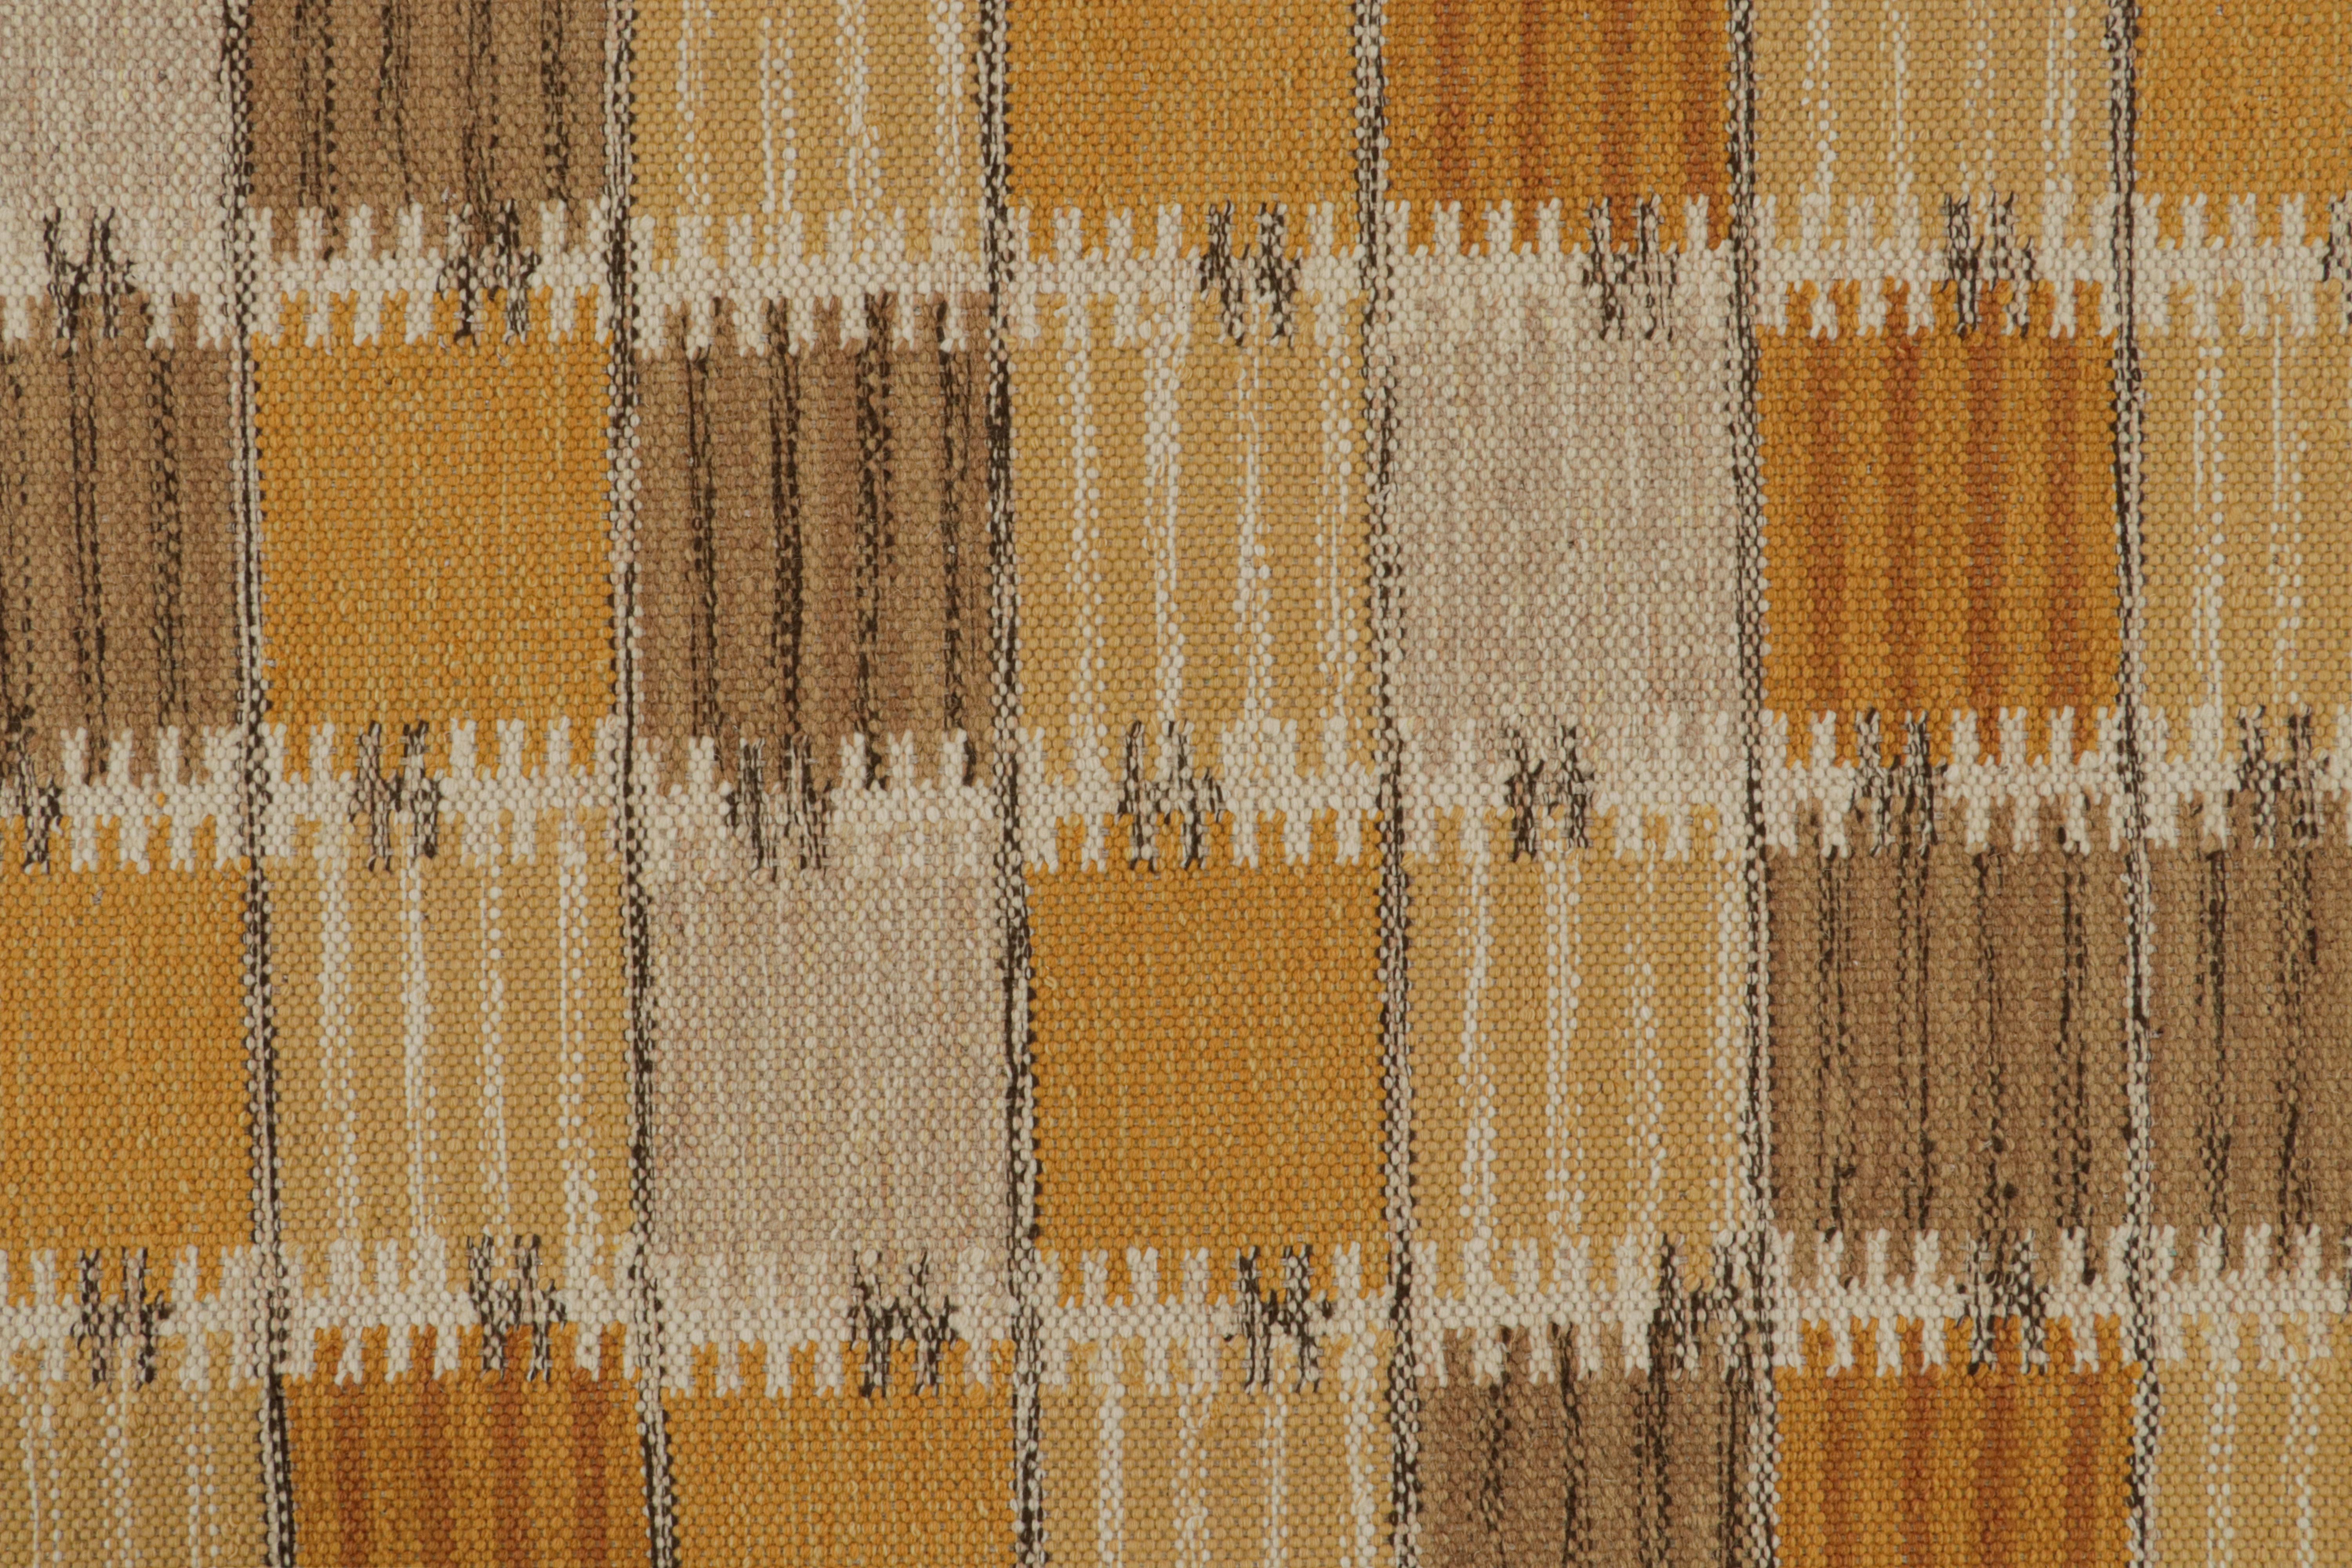 Rug & Kilim’s Scandinavian Style Kilim in Gold & Beige-Brown Geometric Pattern In New Condition For Sale In Long Island City, NY